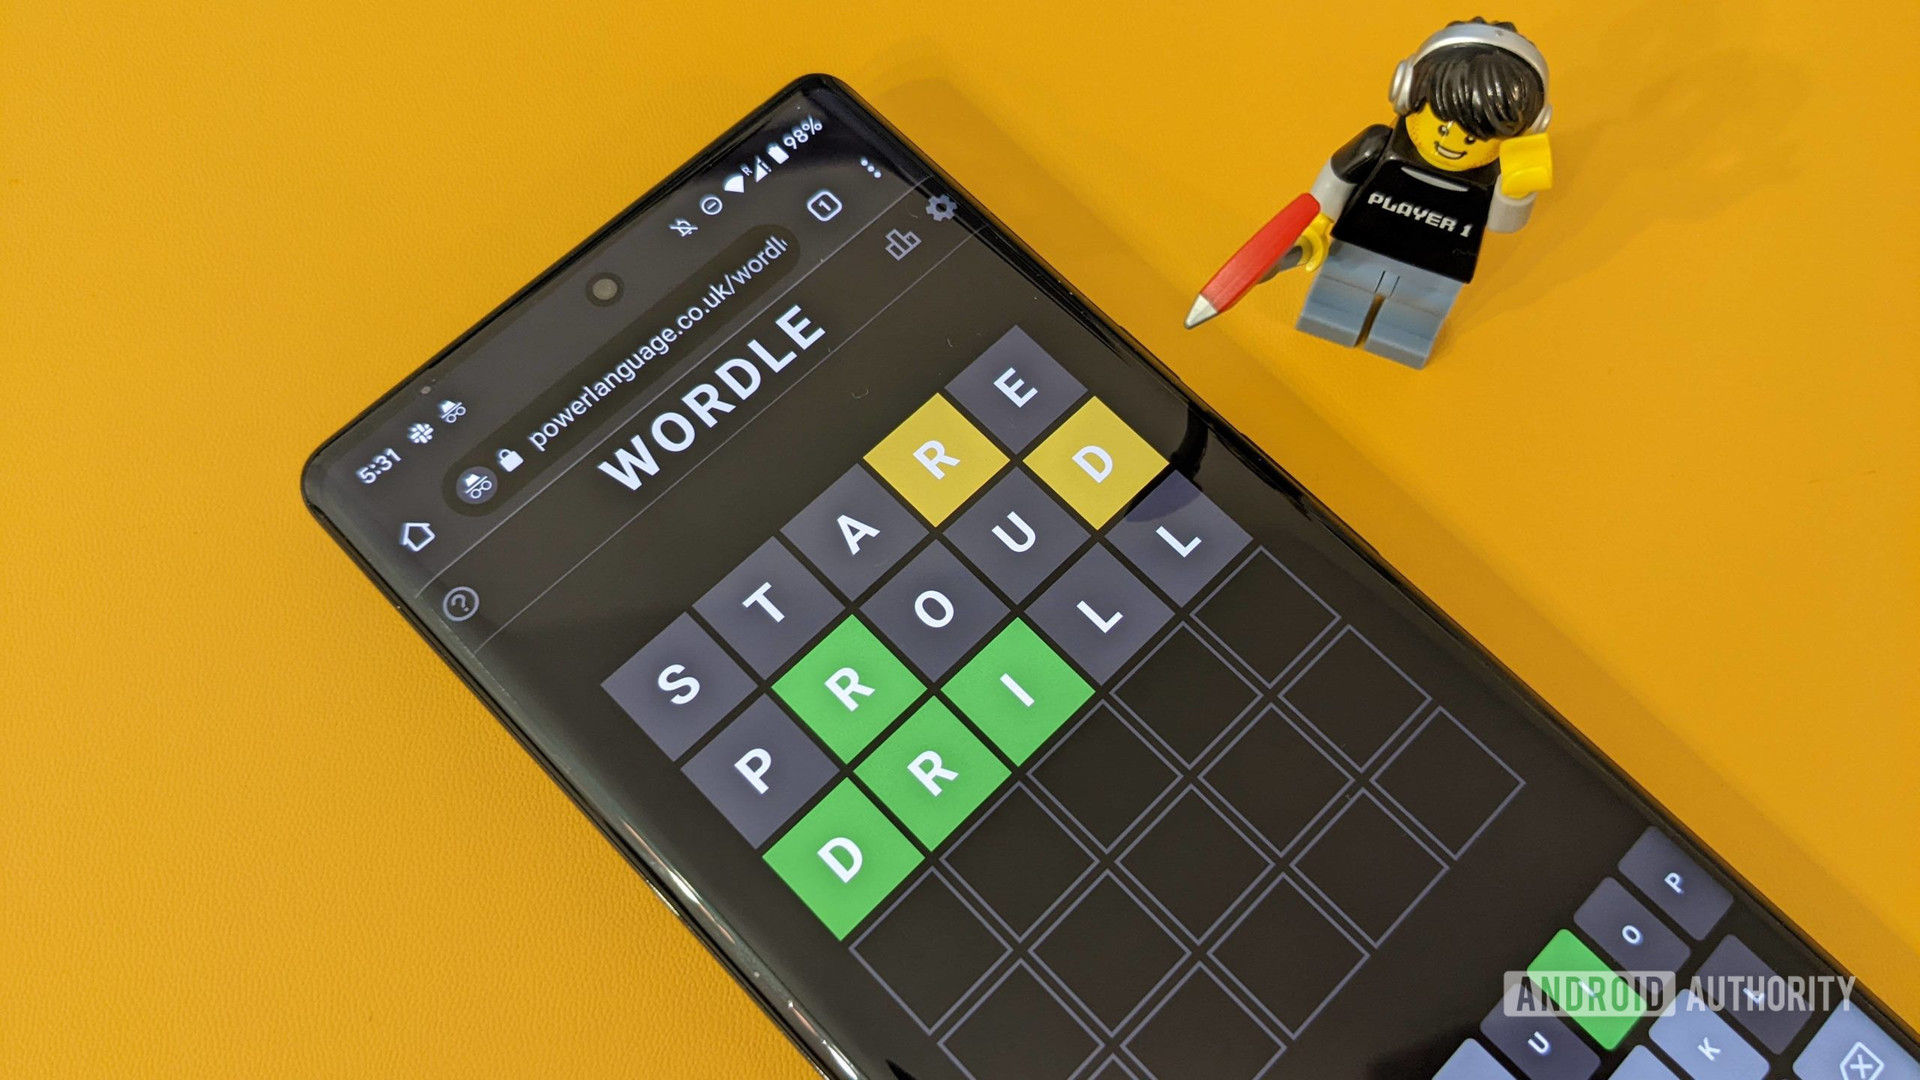 Wordle game screenshot running on a Pixel 6 Pro with a lego player character